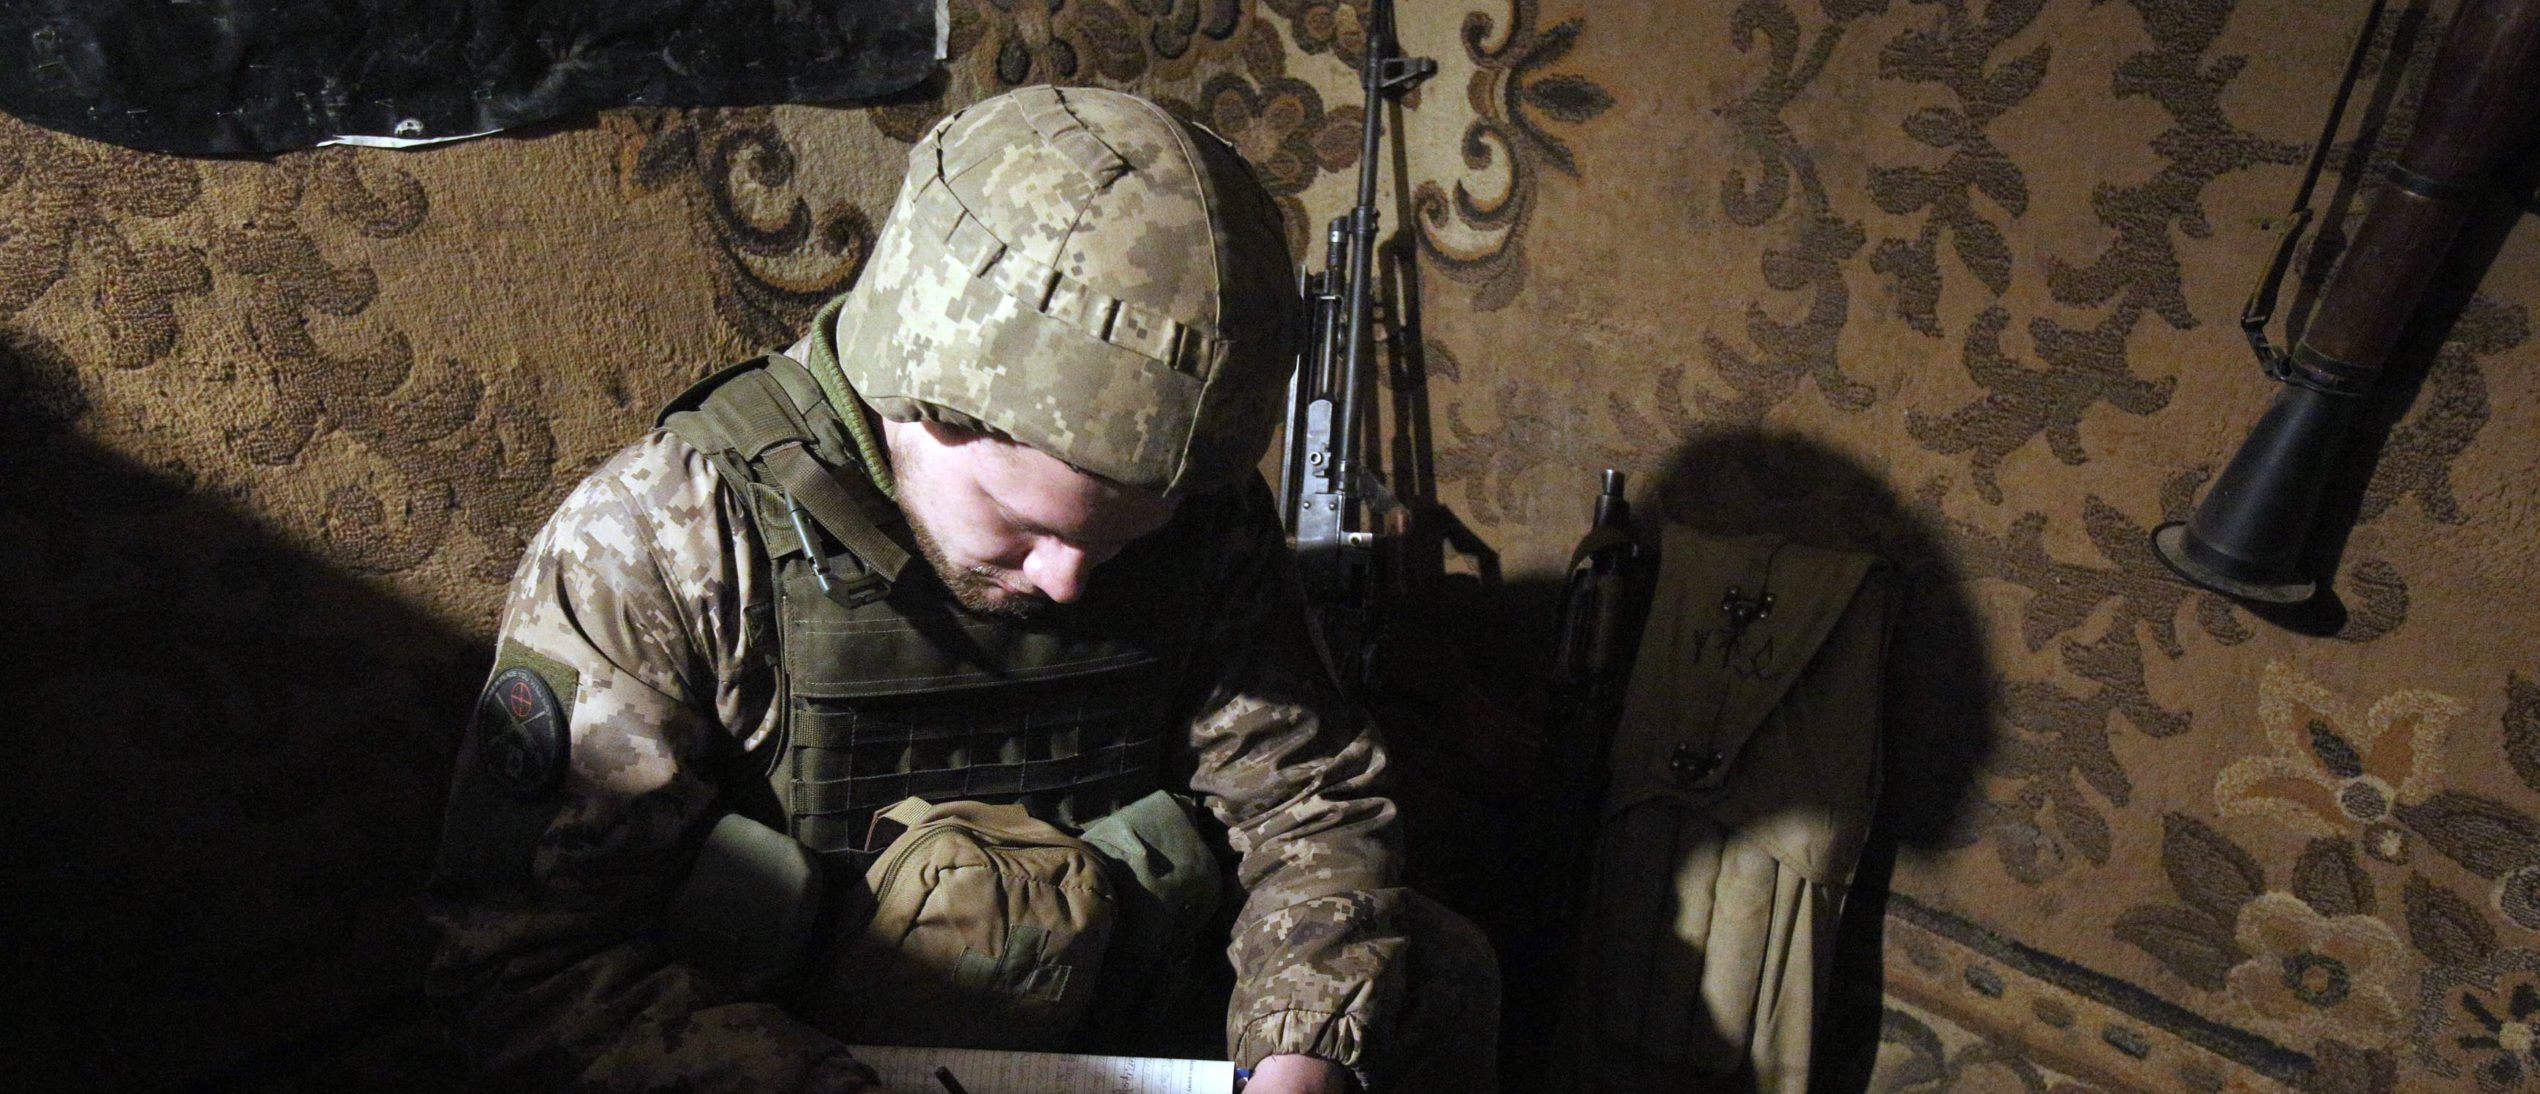 A serviceman of Ukrainian Military Forces writes notes as he keeps his position on the front line with Russia backed separatists, near Novolugansk, in the Donetsk region, on February 17, 2022. (Photo by Anatolii STEPANOV / AFP) (Photo by ANATOLII STEPANOV/AFP via Getty Images)